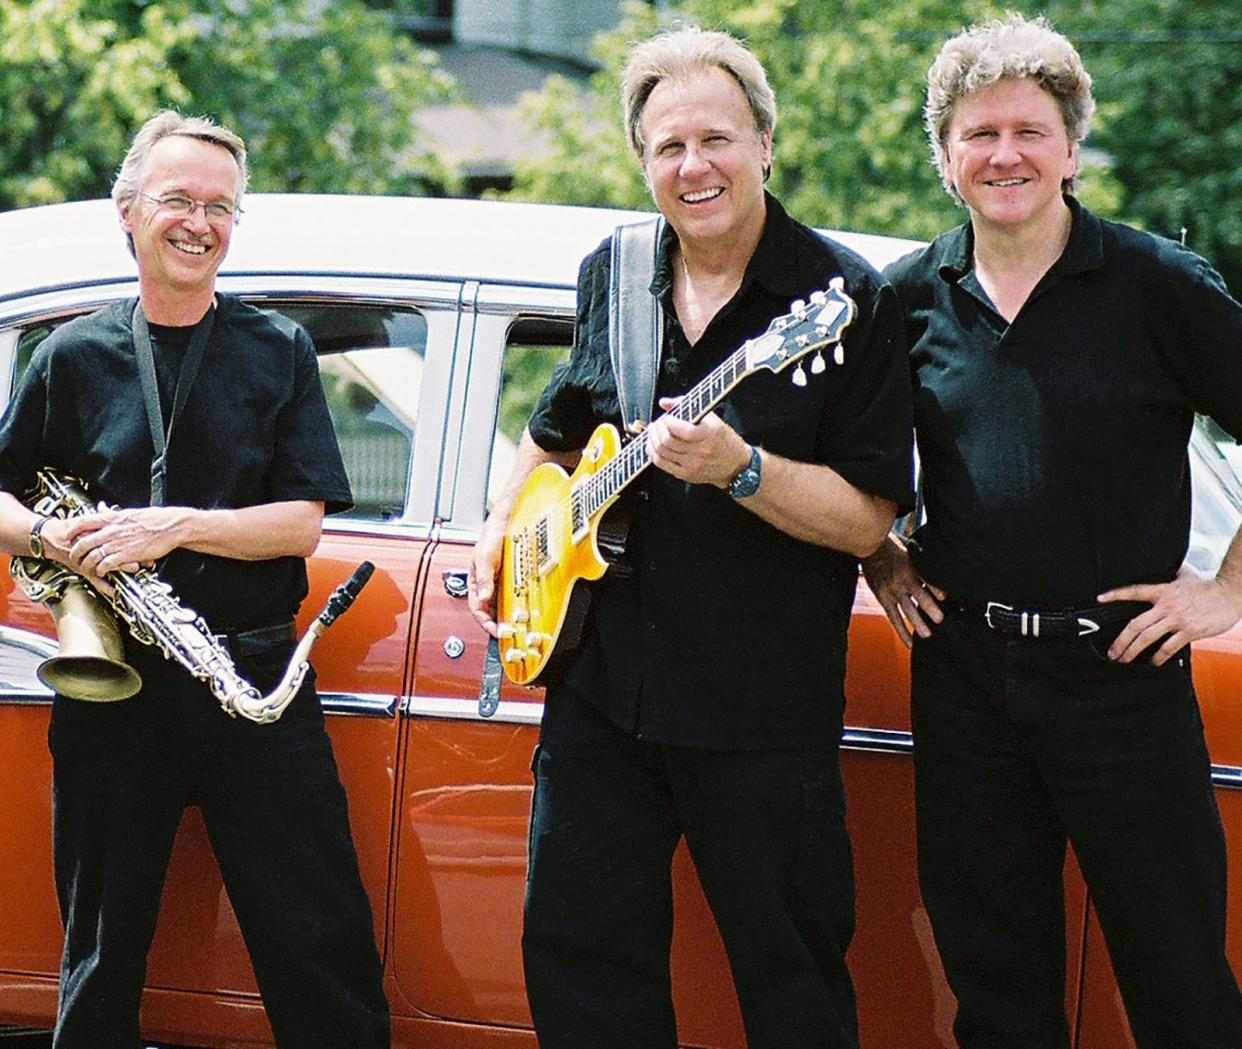 The MoJoTo trio of Monk Rowe, John Hutson and Tom McGrath perform at 6:30 p.m. July 21 as part of the free weekly Summer Music Series at The Barn on Paris Hill.